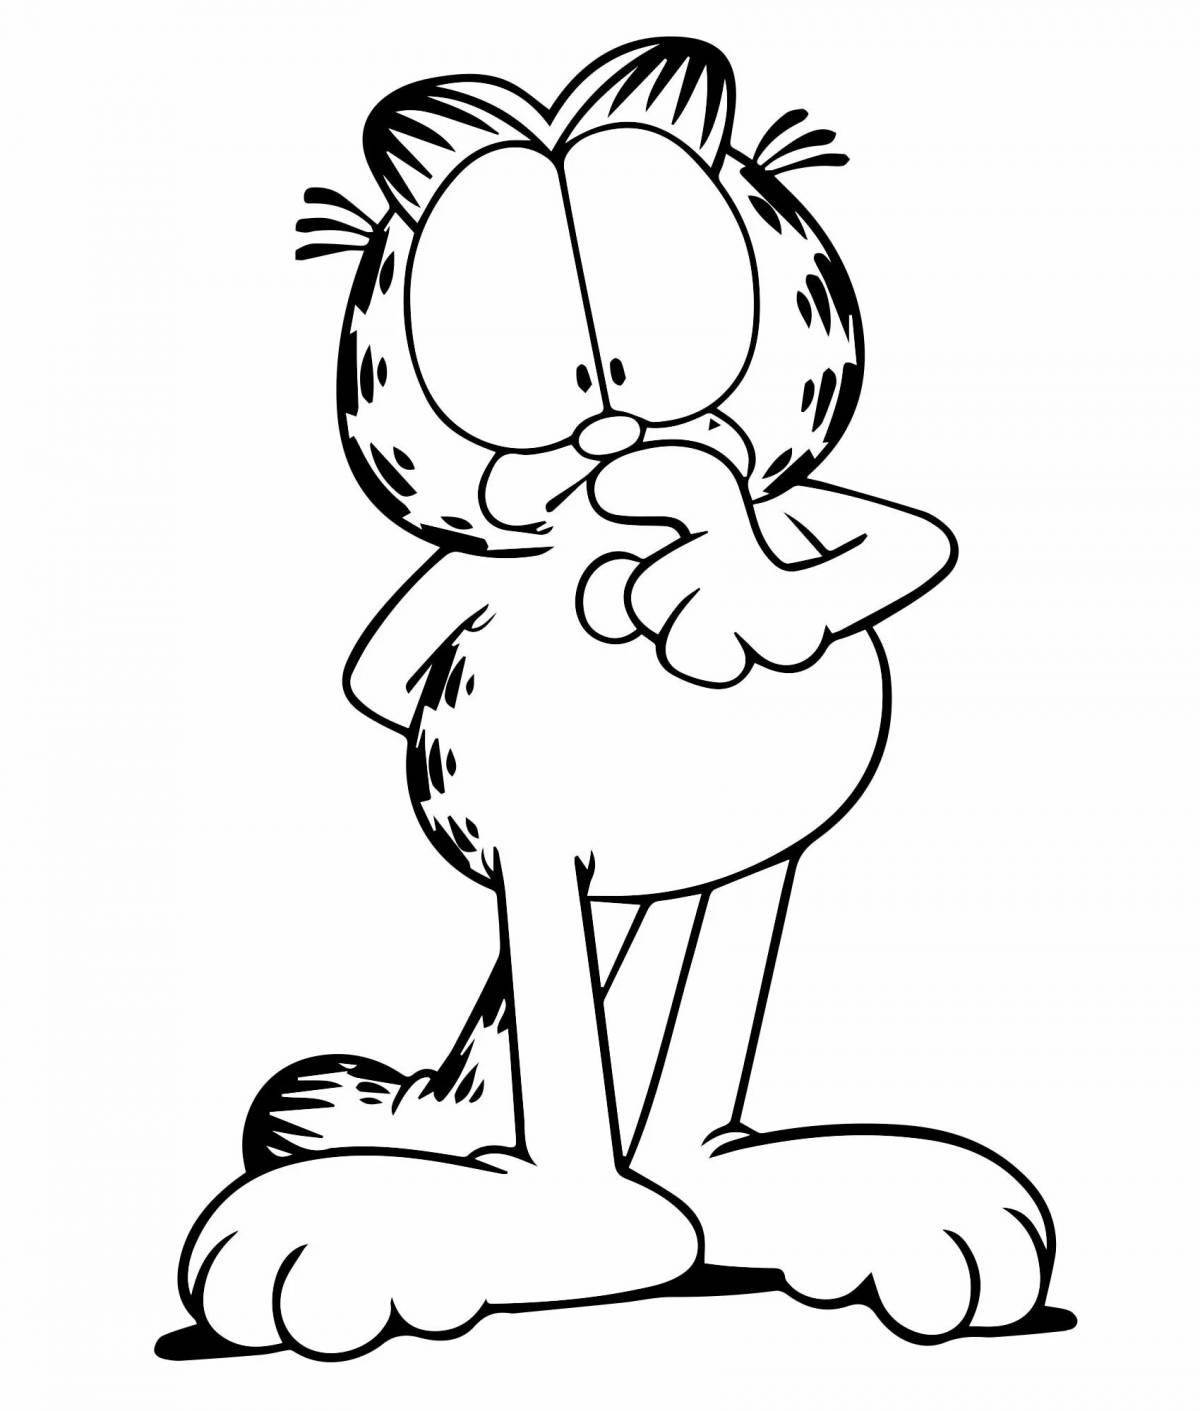 Coloring live garfield